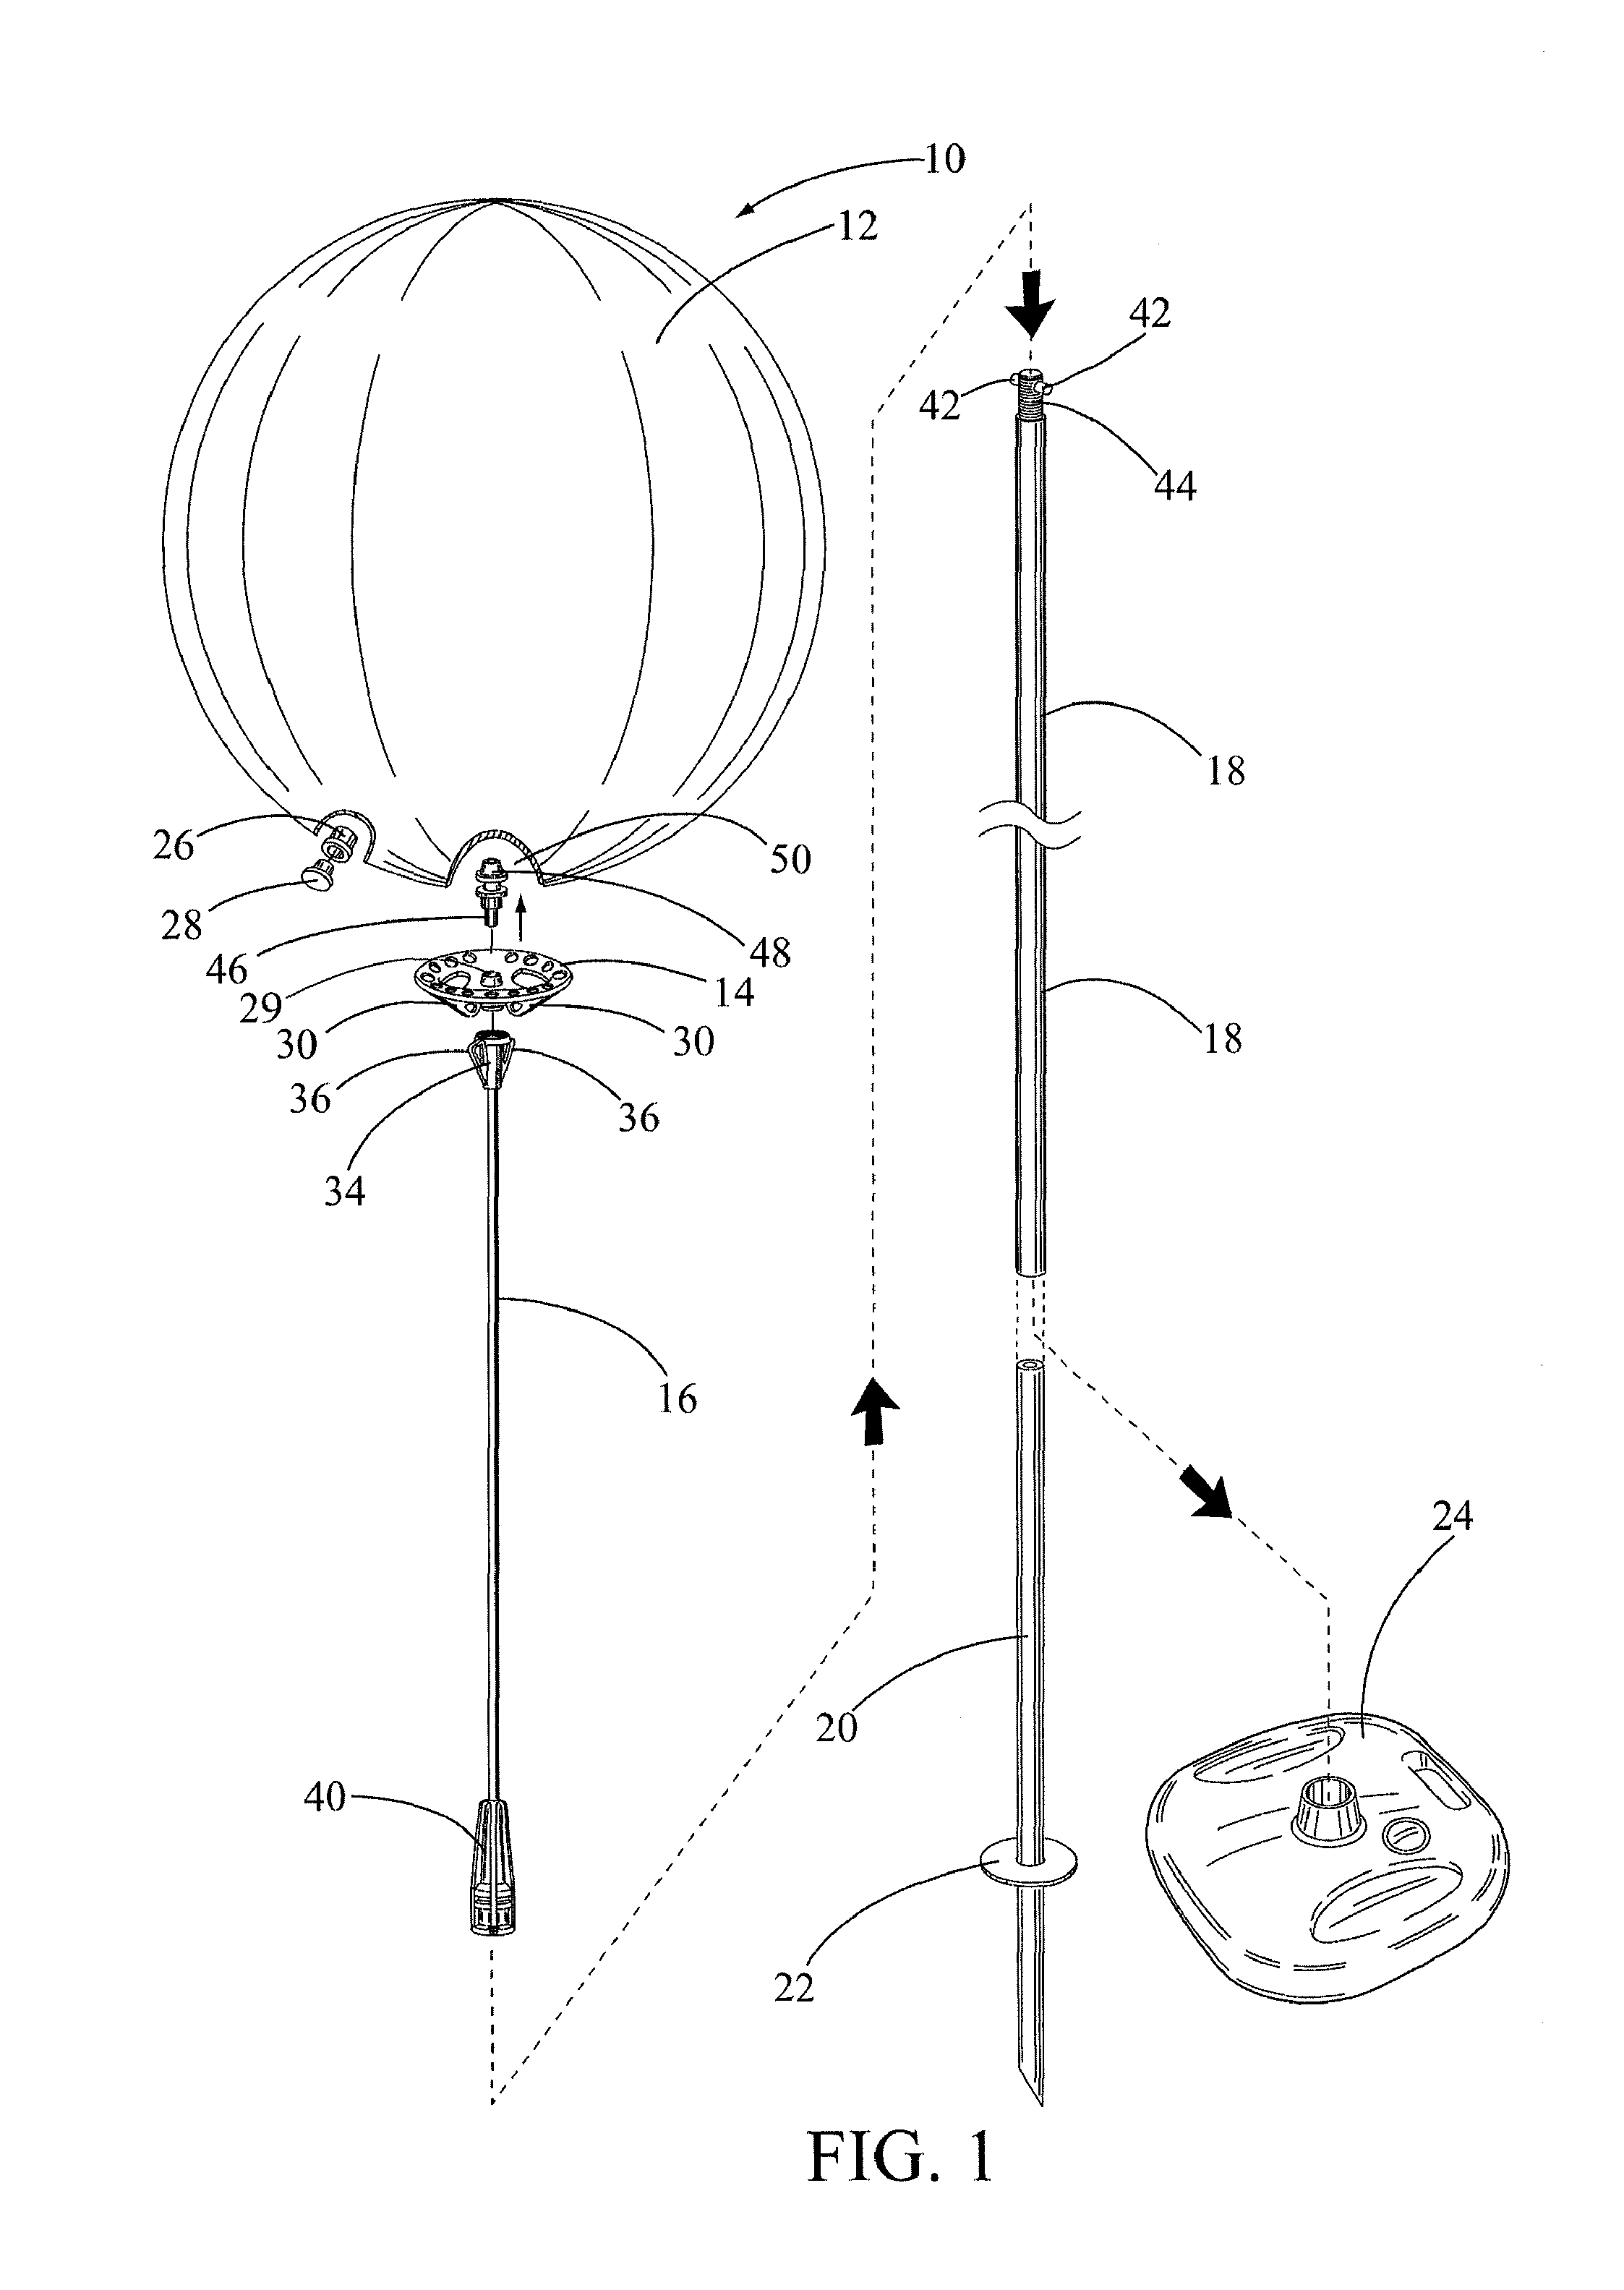 Balloon display system with inflatable balloon, balloon holder cup and flexible rod with mounting pole